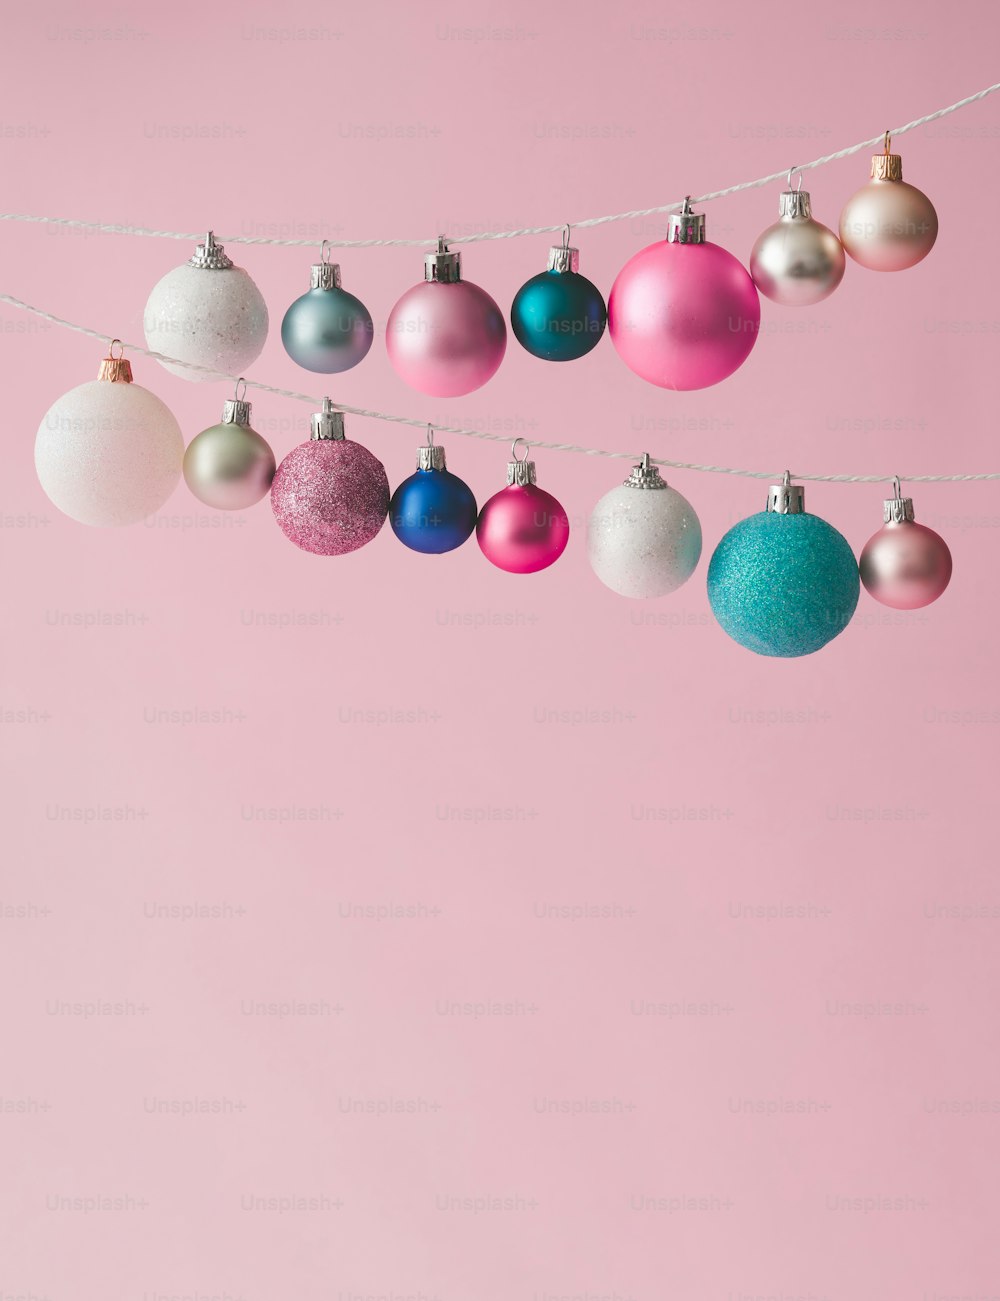 Colorful pastel Chrstmas decoration balls on pink background.